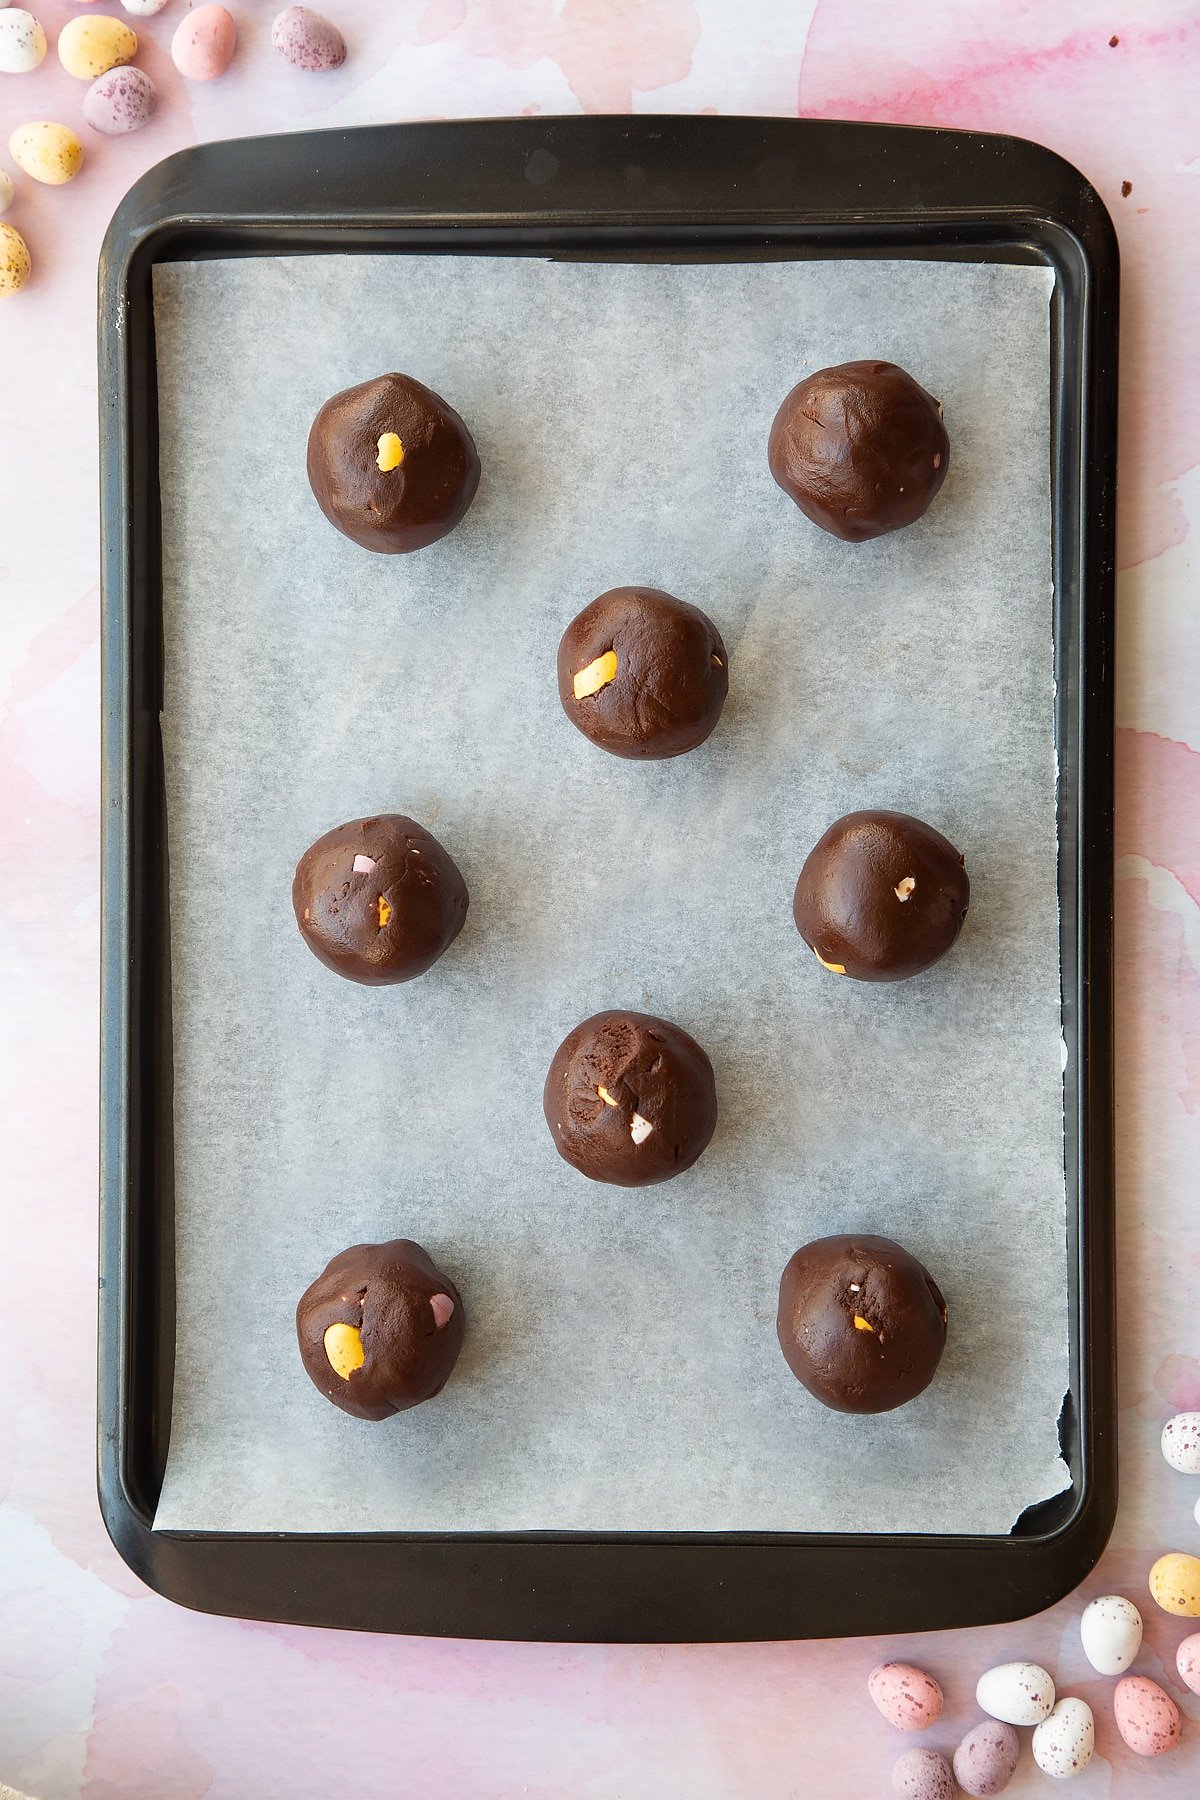 Chocolate Easter cookie dough balls on a tray lined with baking paper.